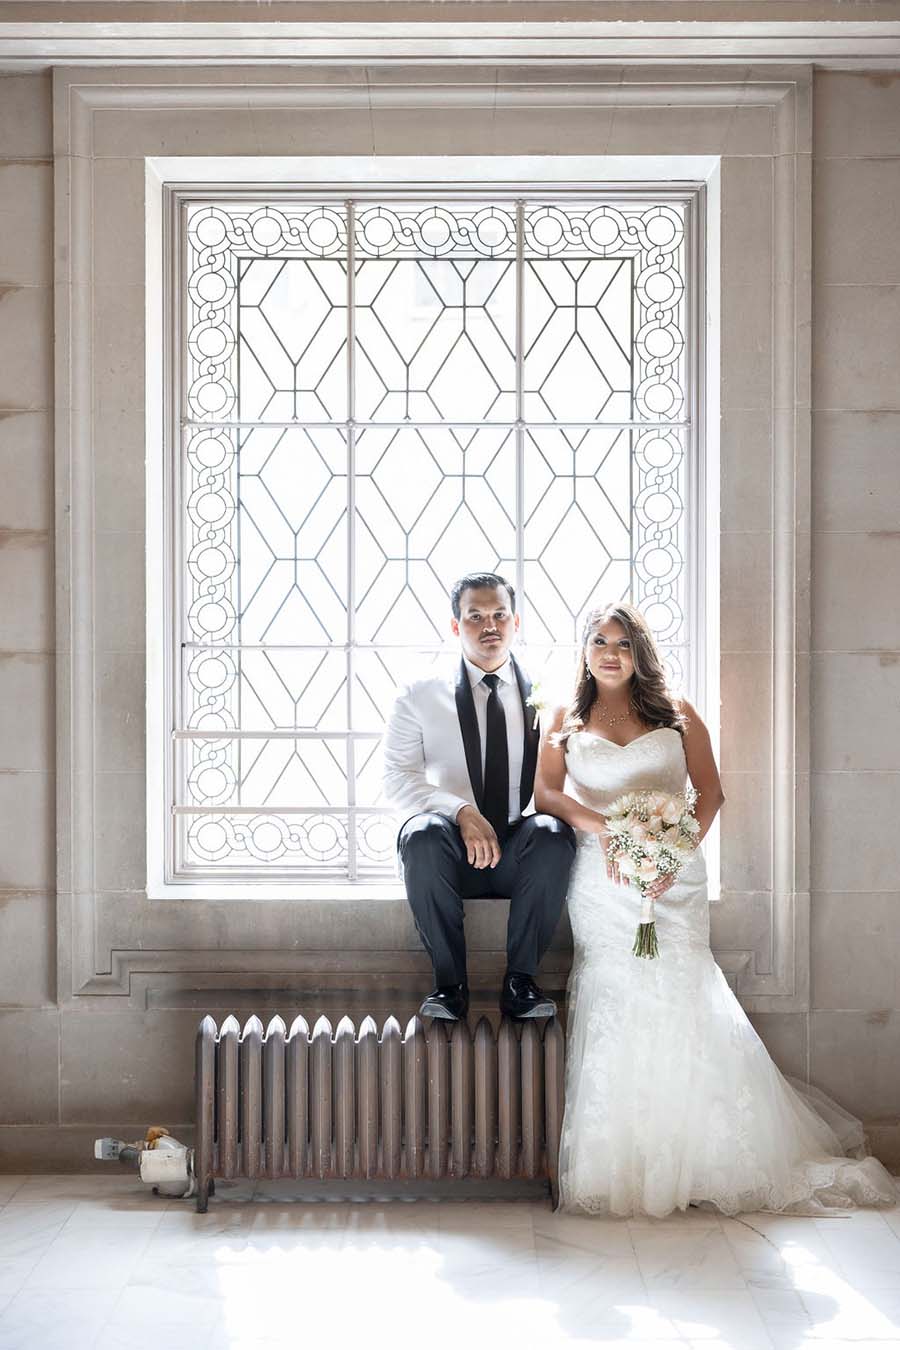 San Francisco City Hall wedding photo - inside, in front of window